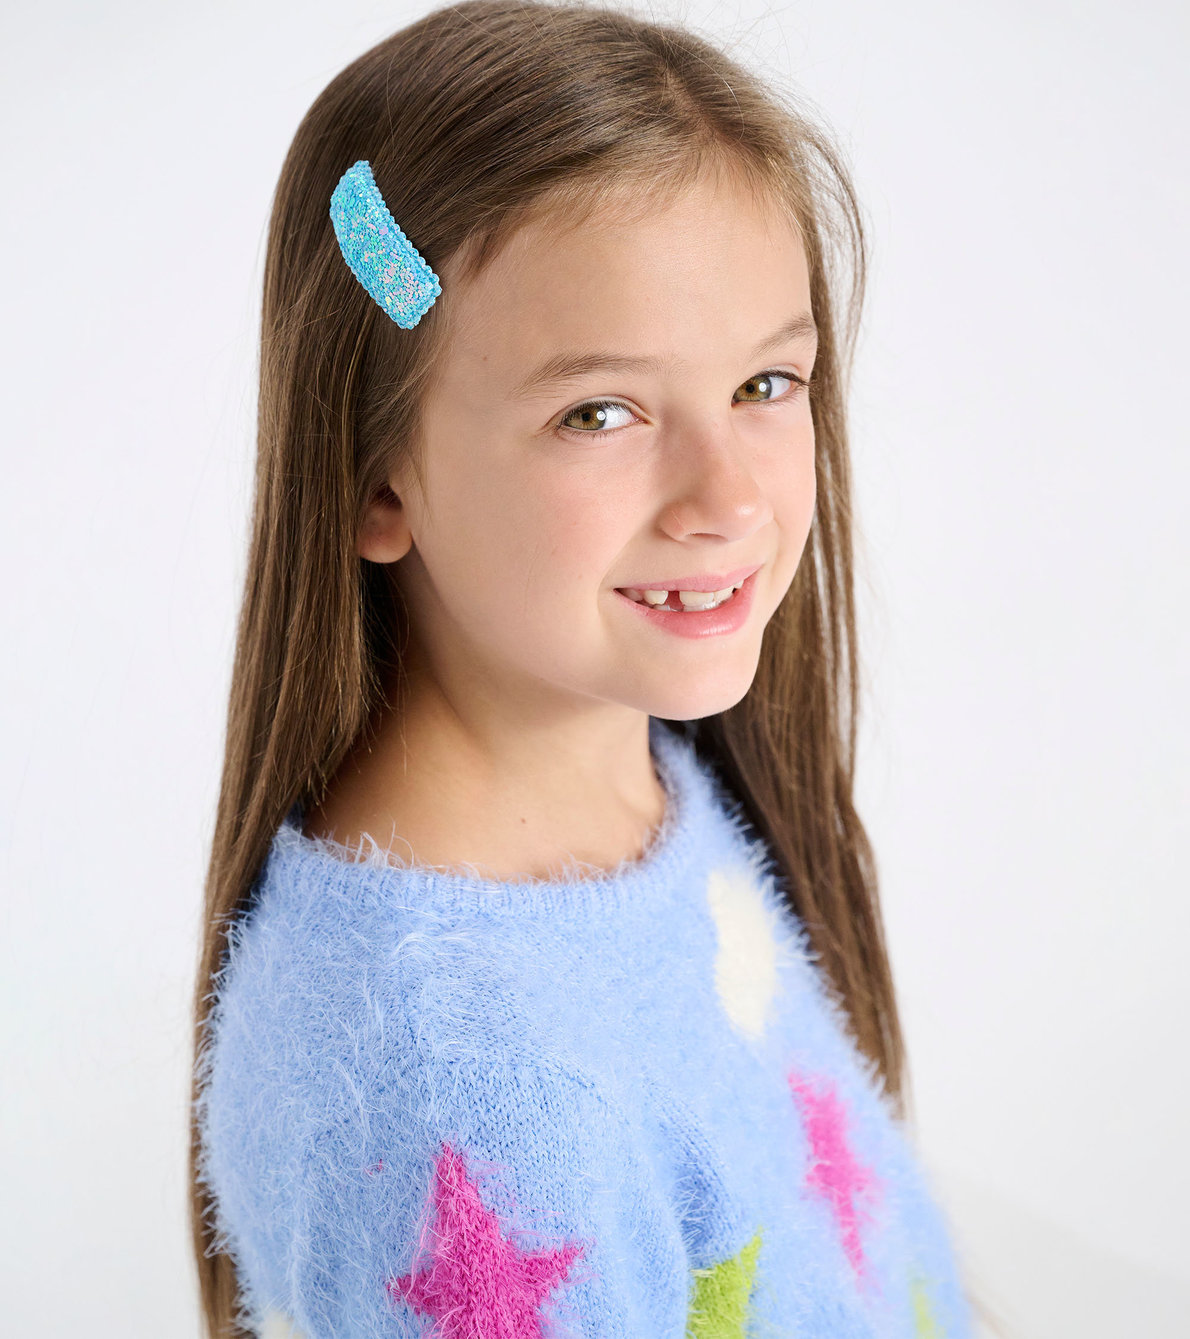 View larger image of Girls Celestial Sky Fuzzy Sweater